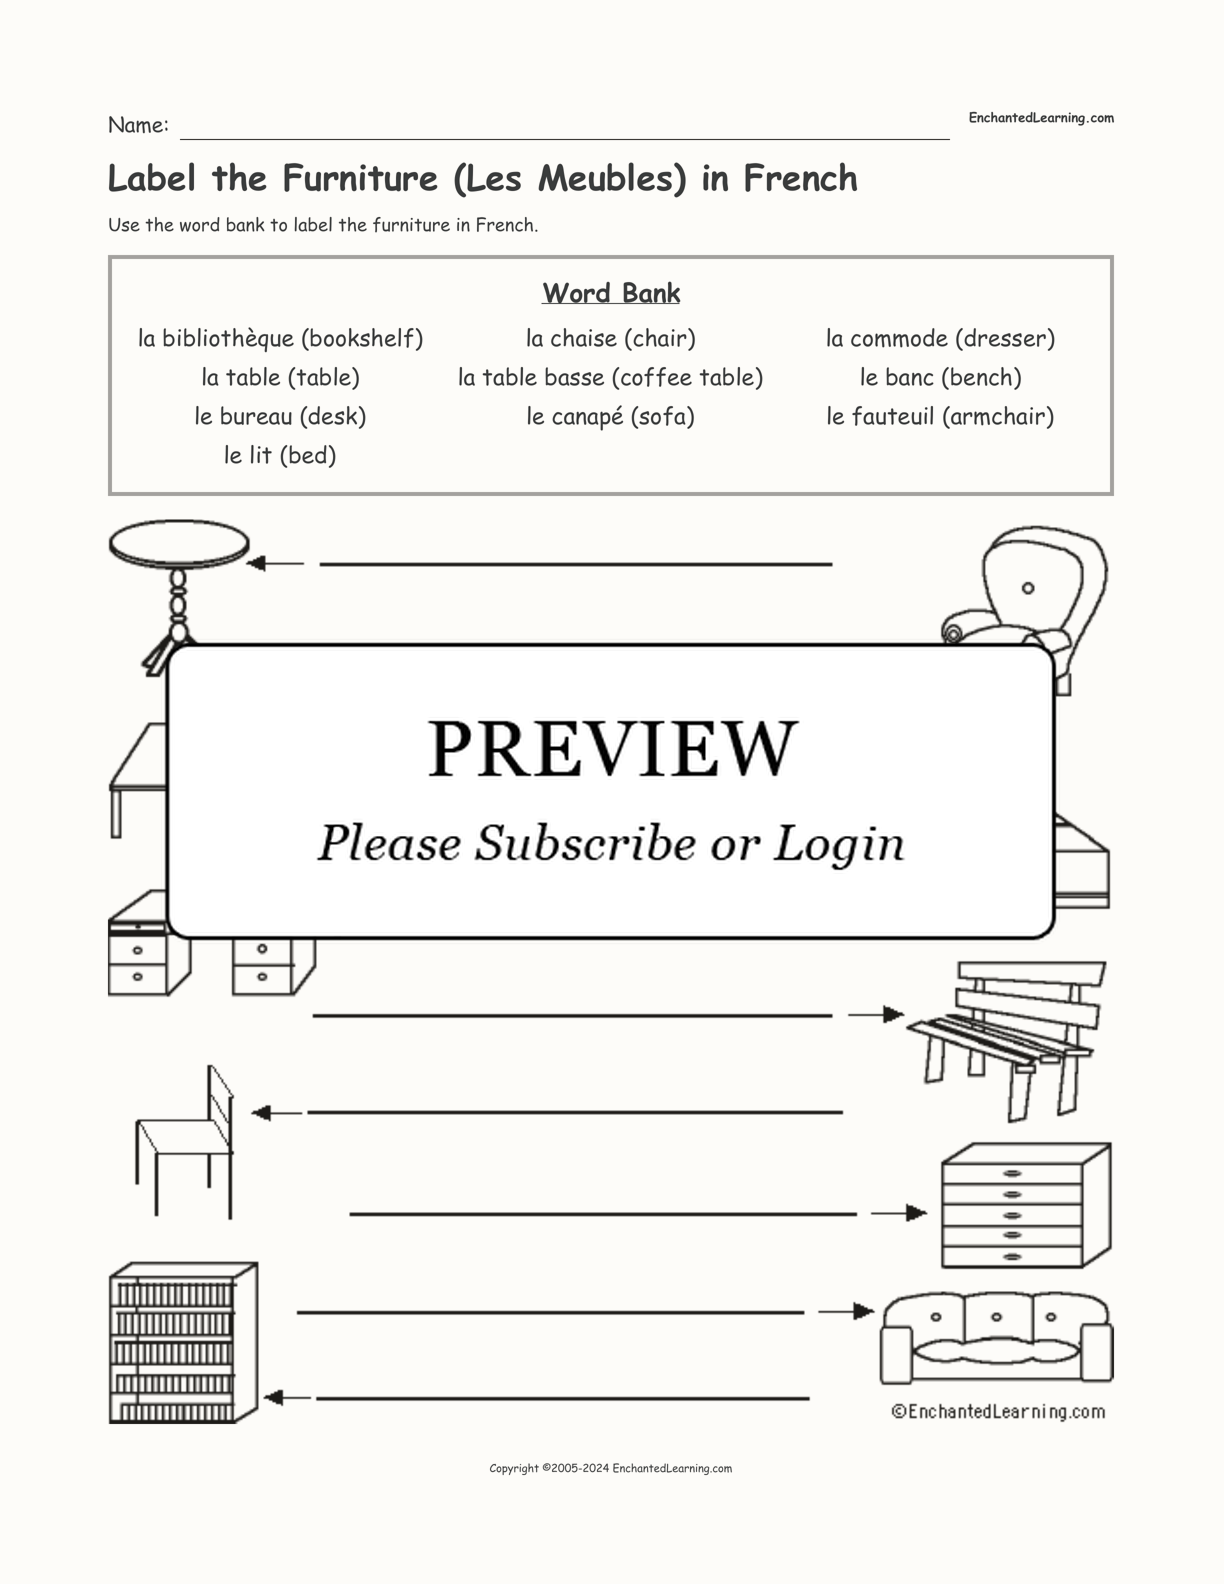 Label the Furniture (Les Meubles) in French interactive worksheet page 1